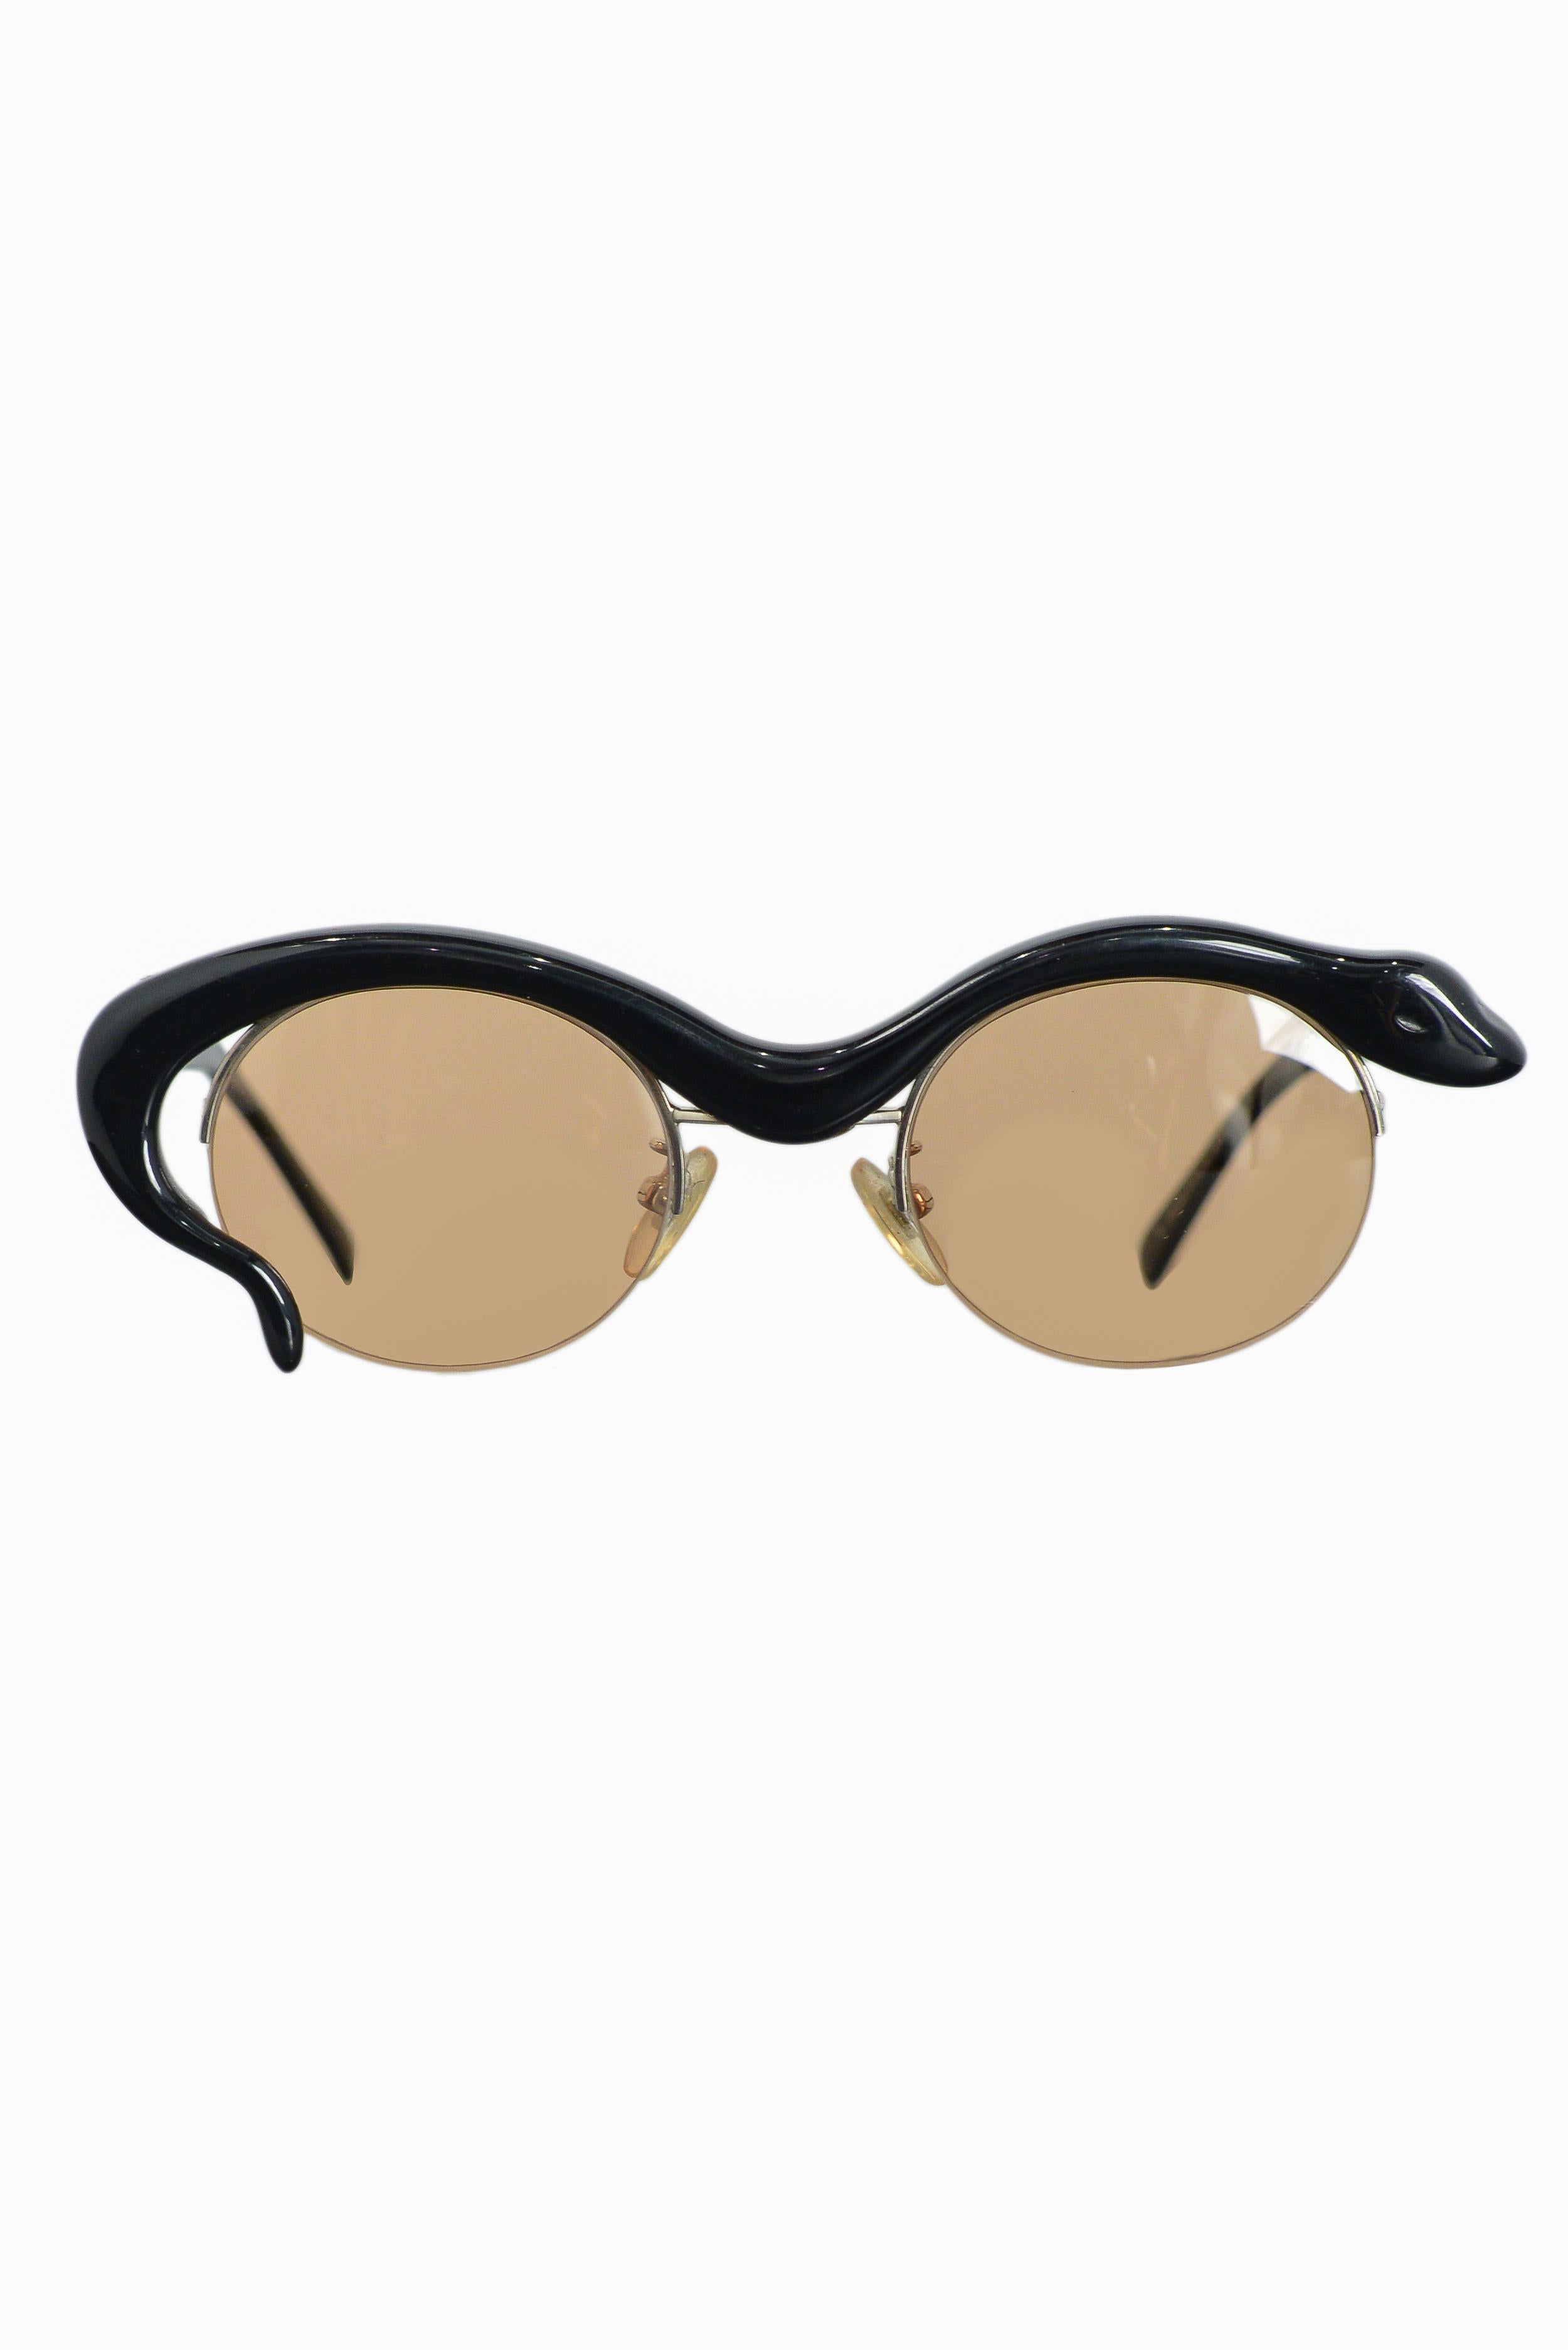 Vintage Yohji Yamamoto limited edition black snake shaped frames feautring amber colored lenses. Circa 1980's. Comes with original case.

Never Been Worn; Pristine Condition